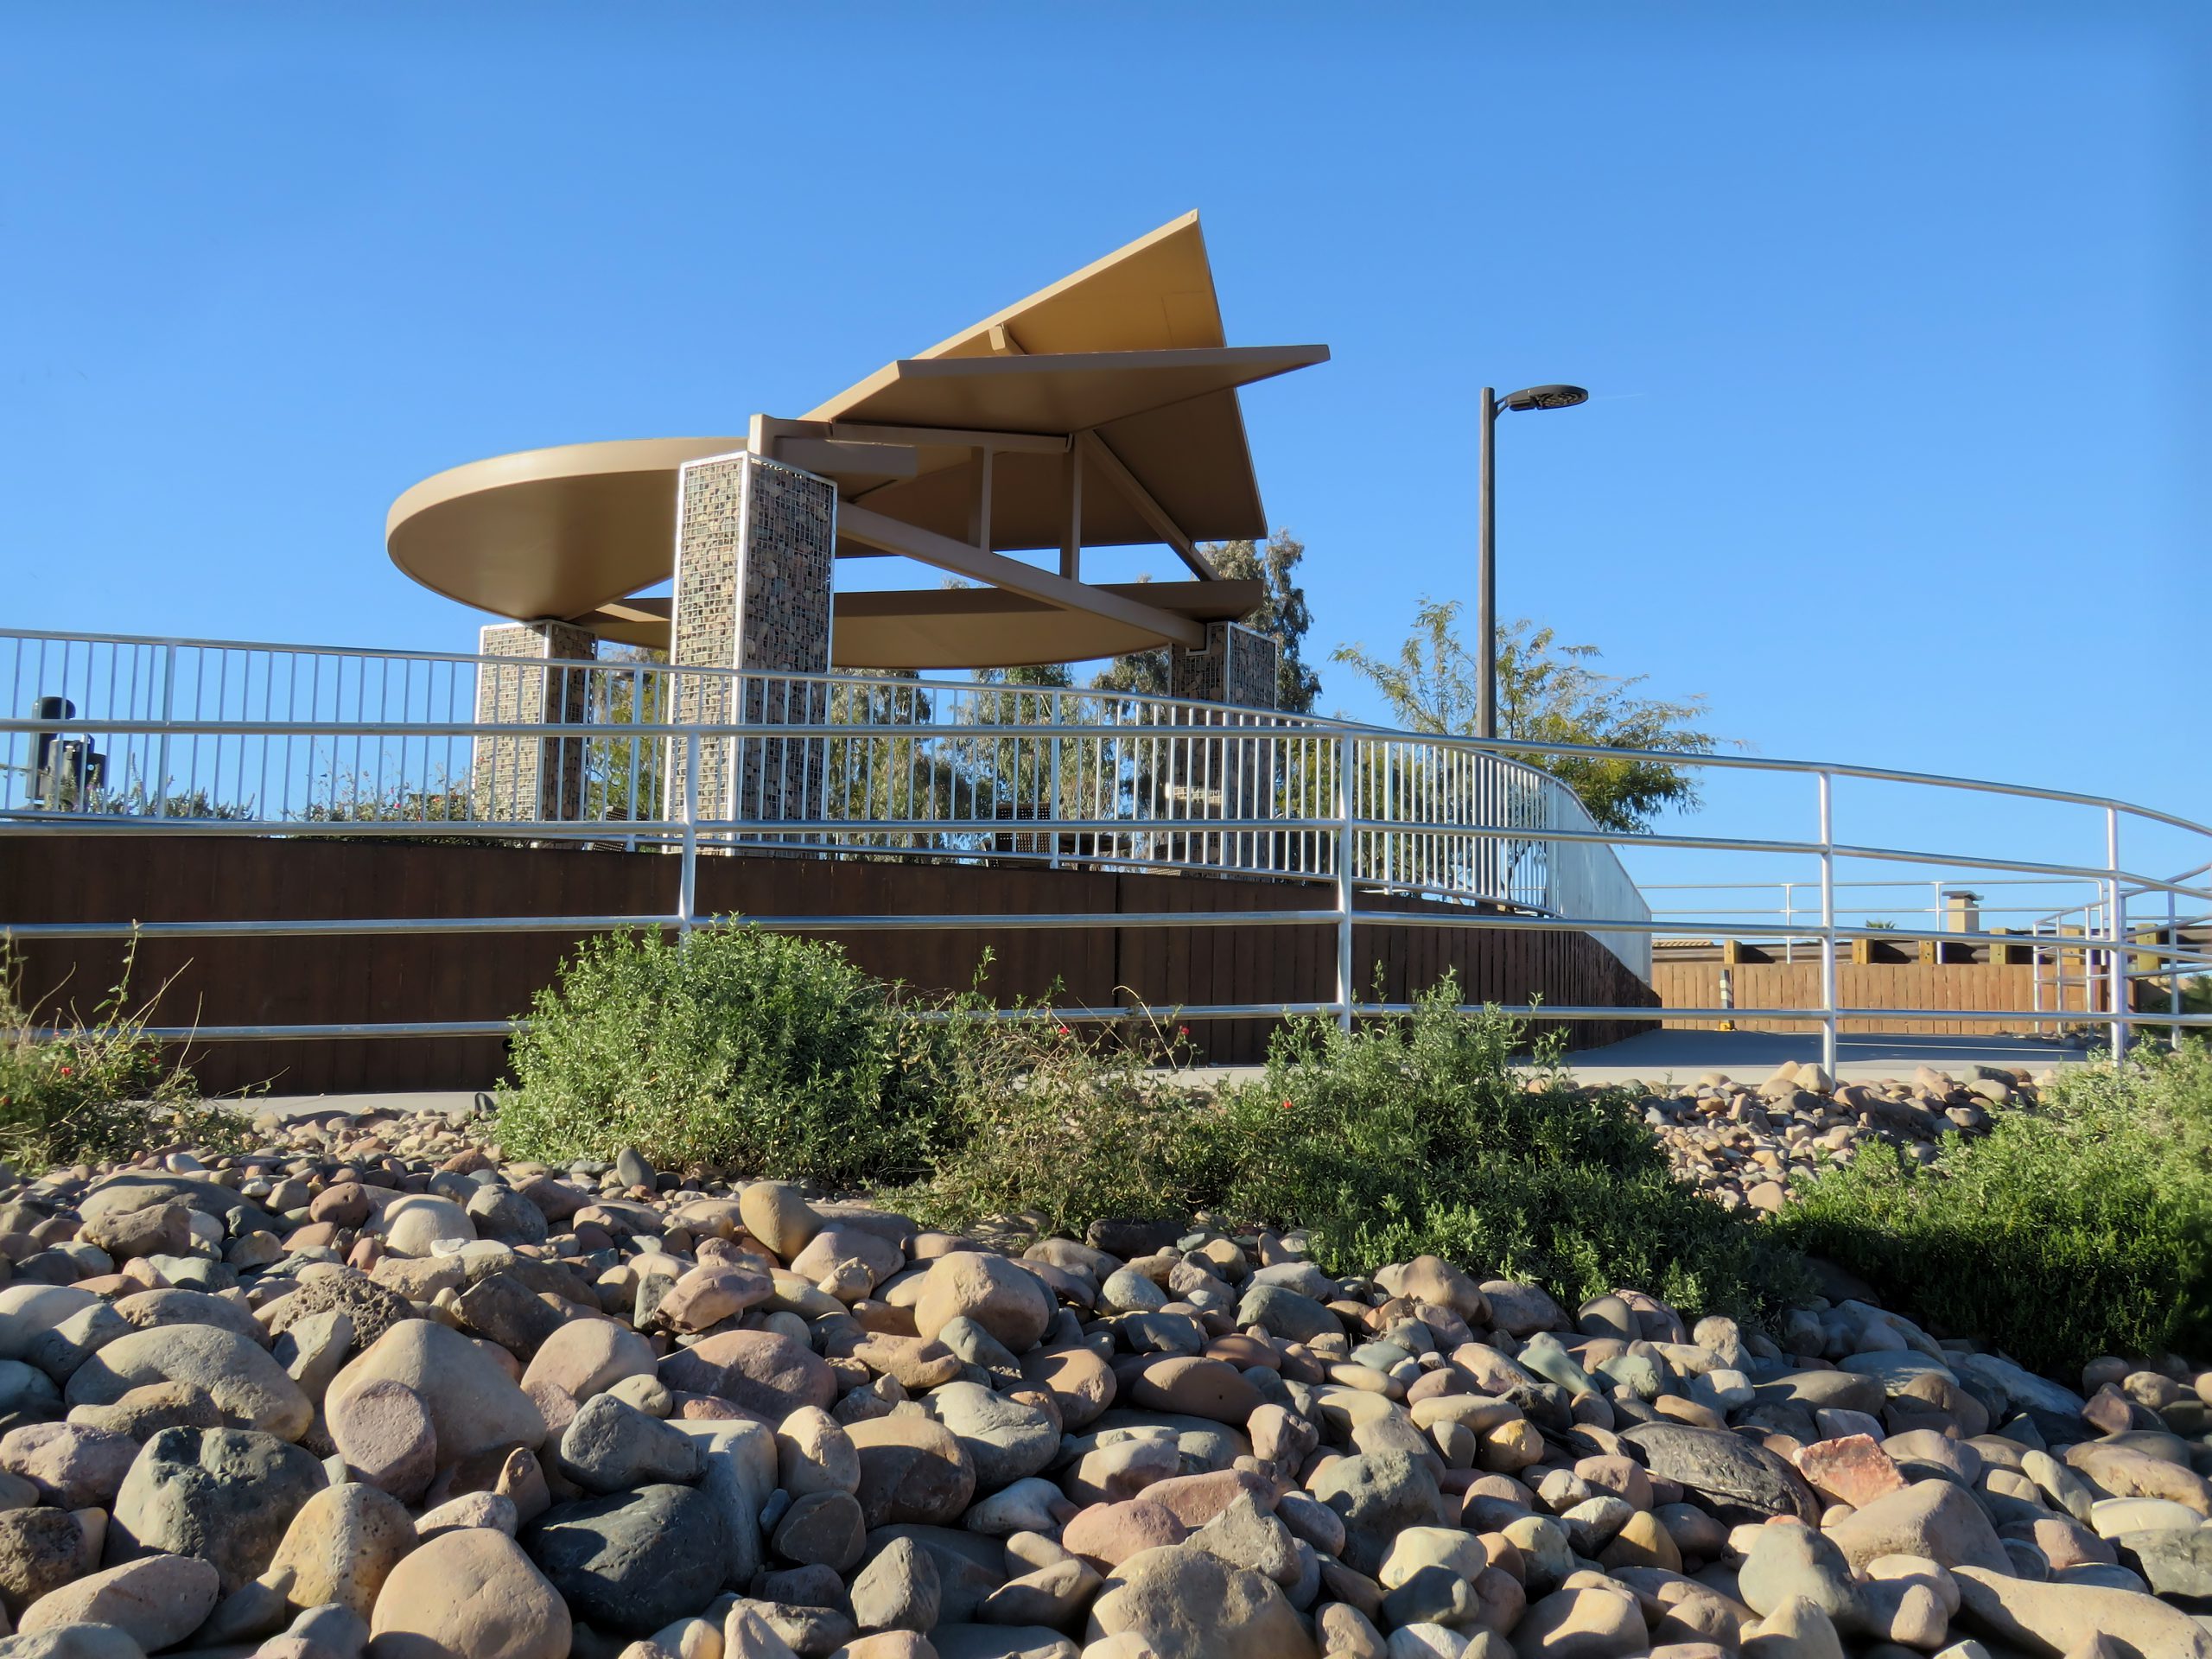 The sculptural shade structure rises up in the background. An accessible ramp in the foreground sweeps through native shrubs and river rock.